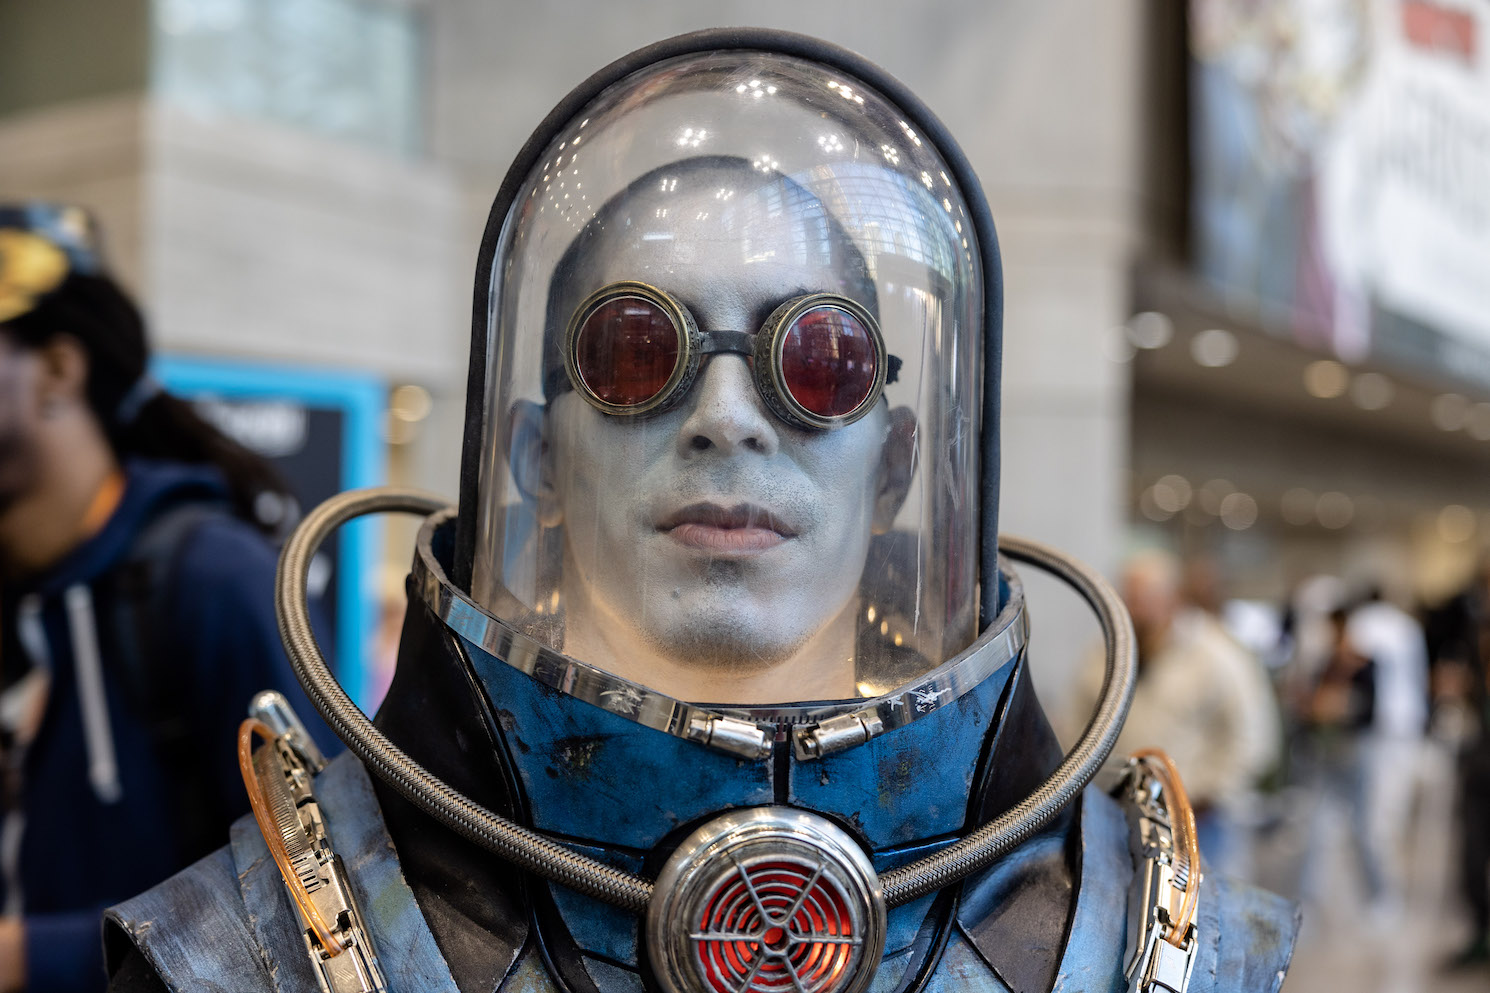 A blue-faced cosplayer wearing a pair of red goggles and a glass-finished hazmat suit.